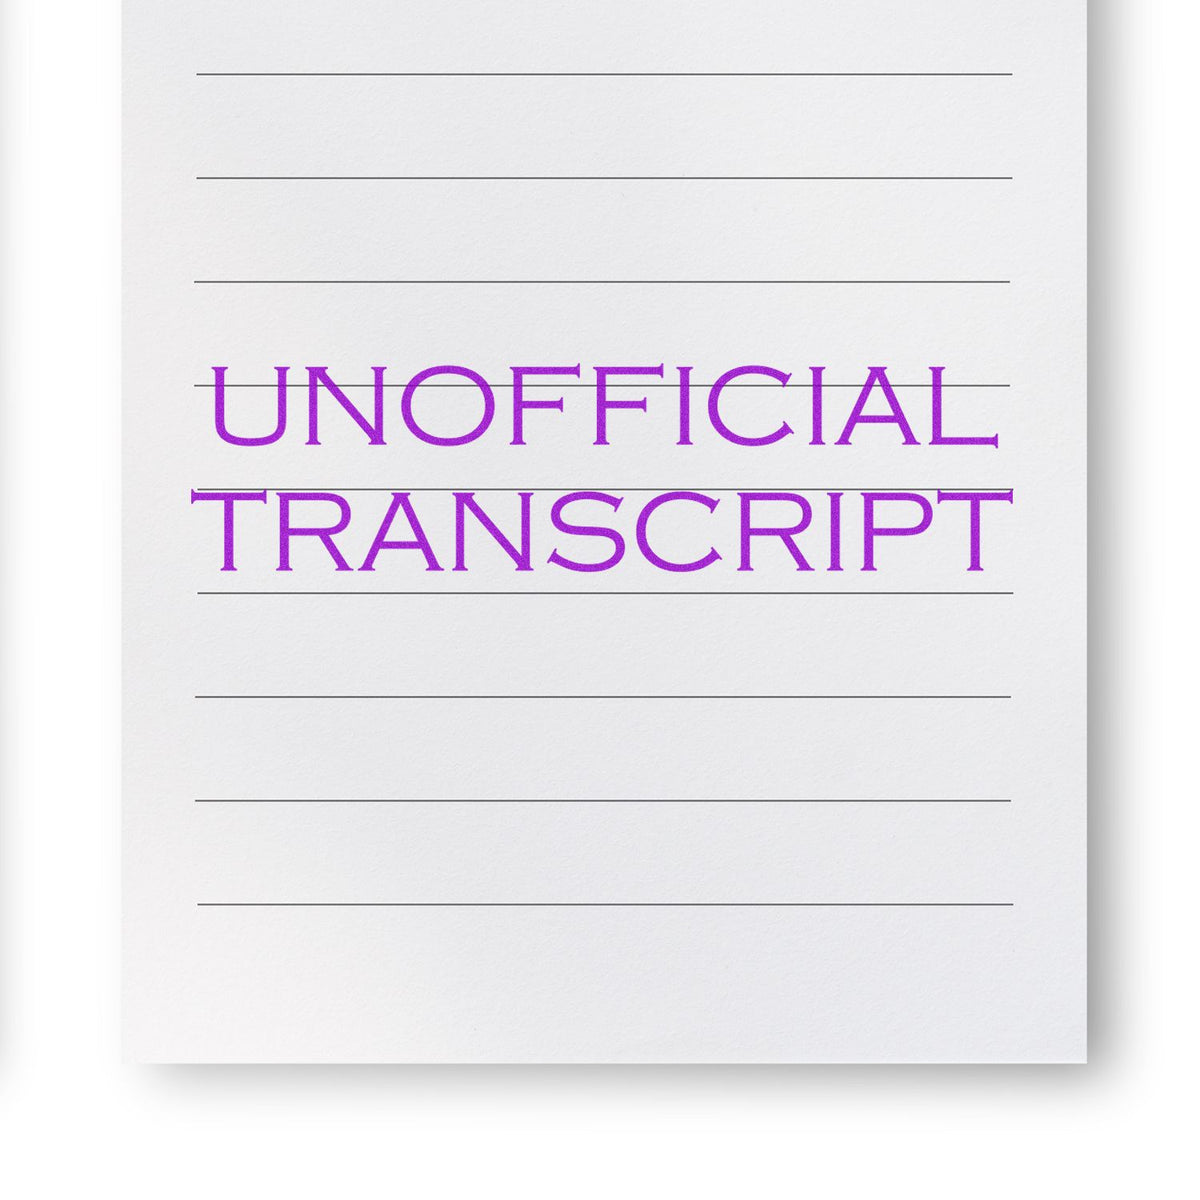 Unofficial Transcript Rubber Stamp In Use